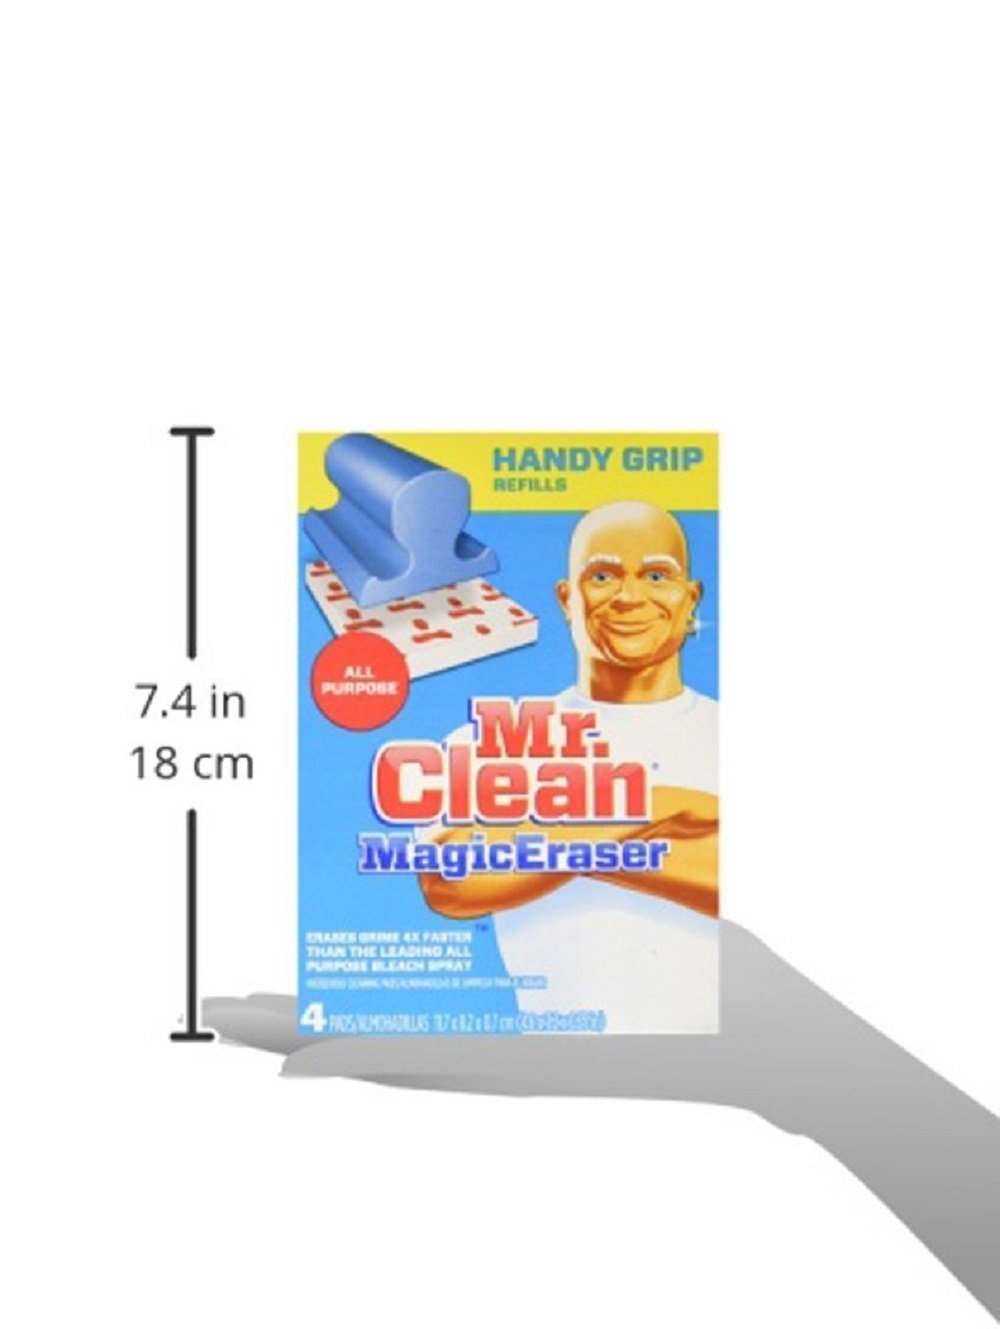 Mr Clean Magic Eraser Handy Grip All Purpose Cleaner Refills 4 Count (colors and packaging may vary)